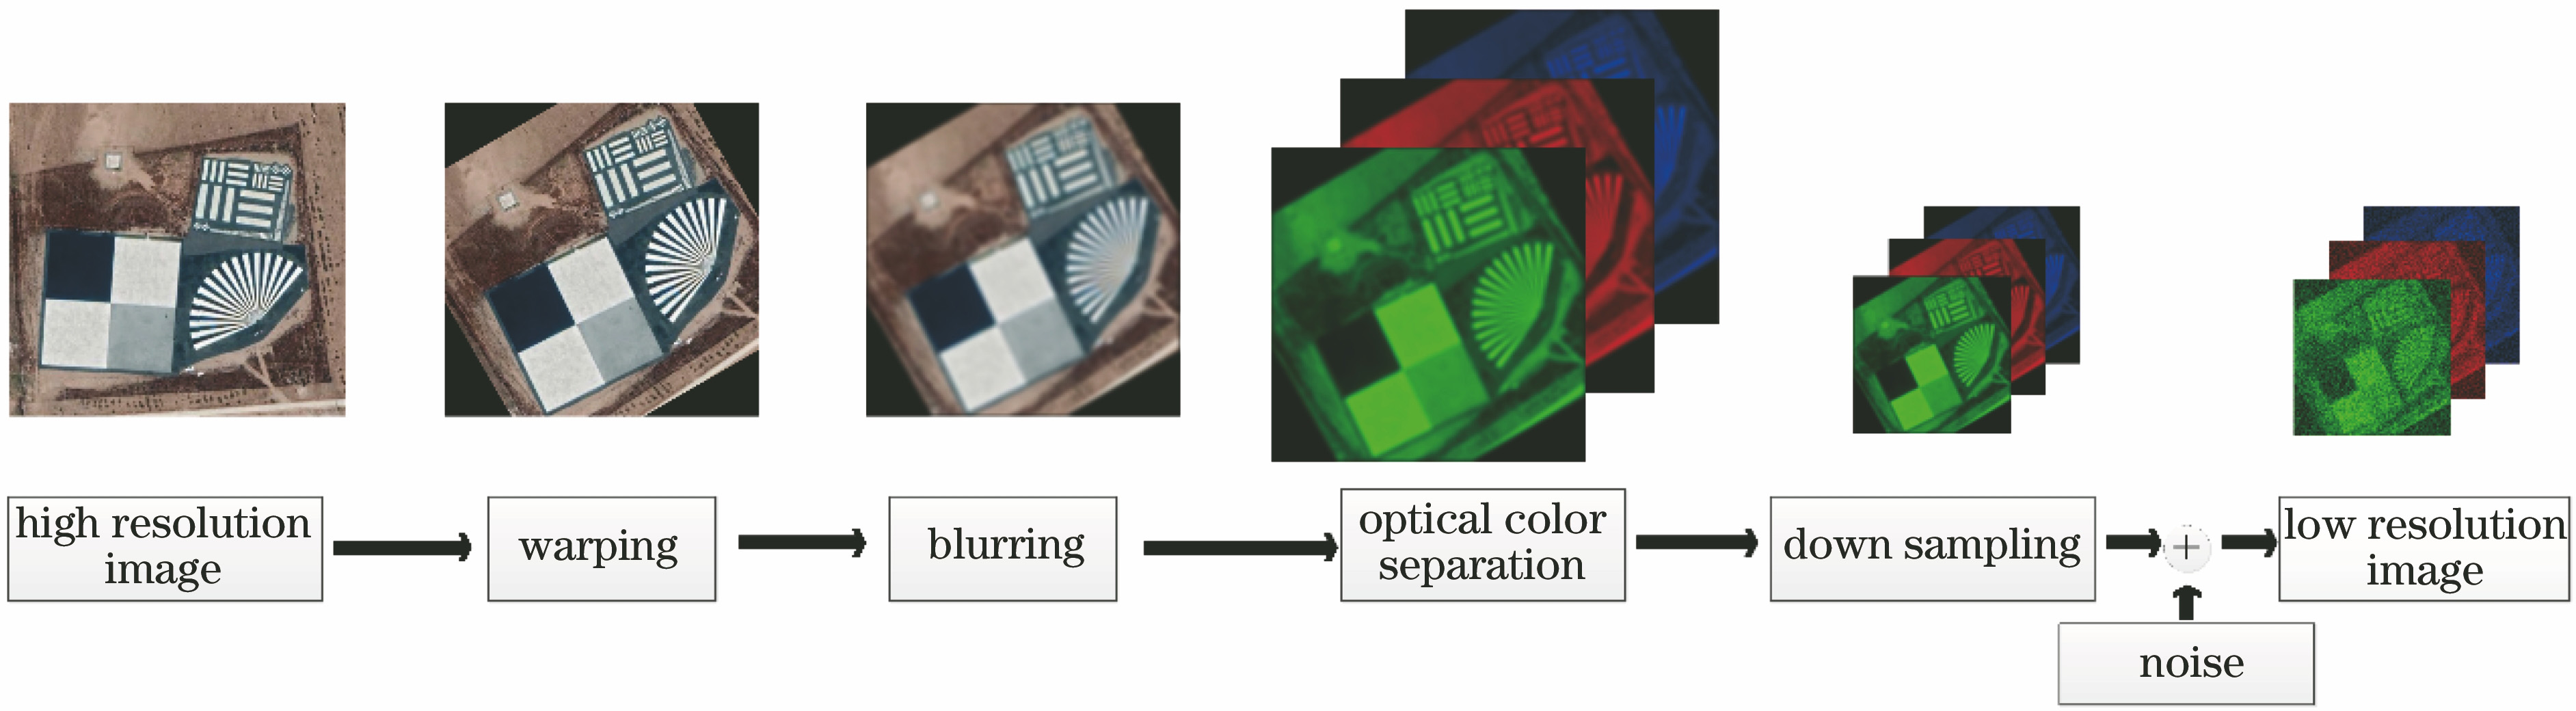 Multi-spectral remote sensing imaging degradation model from high resolution images to low resolution images